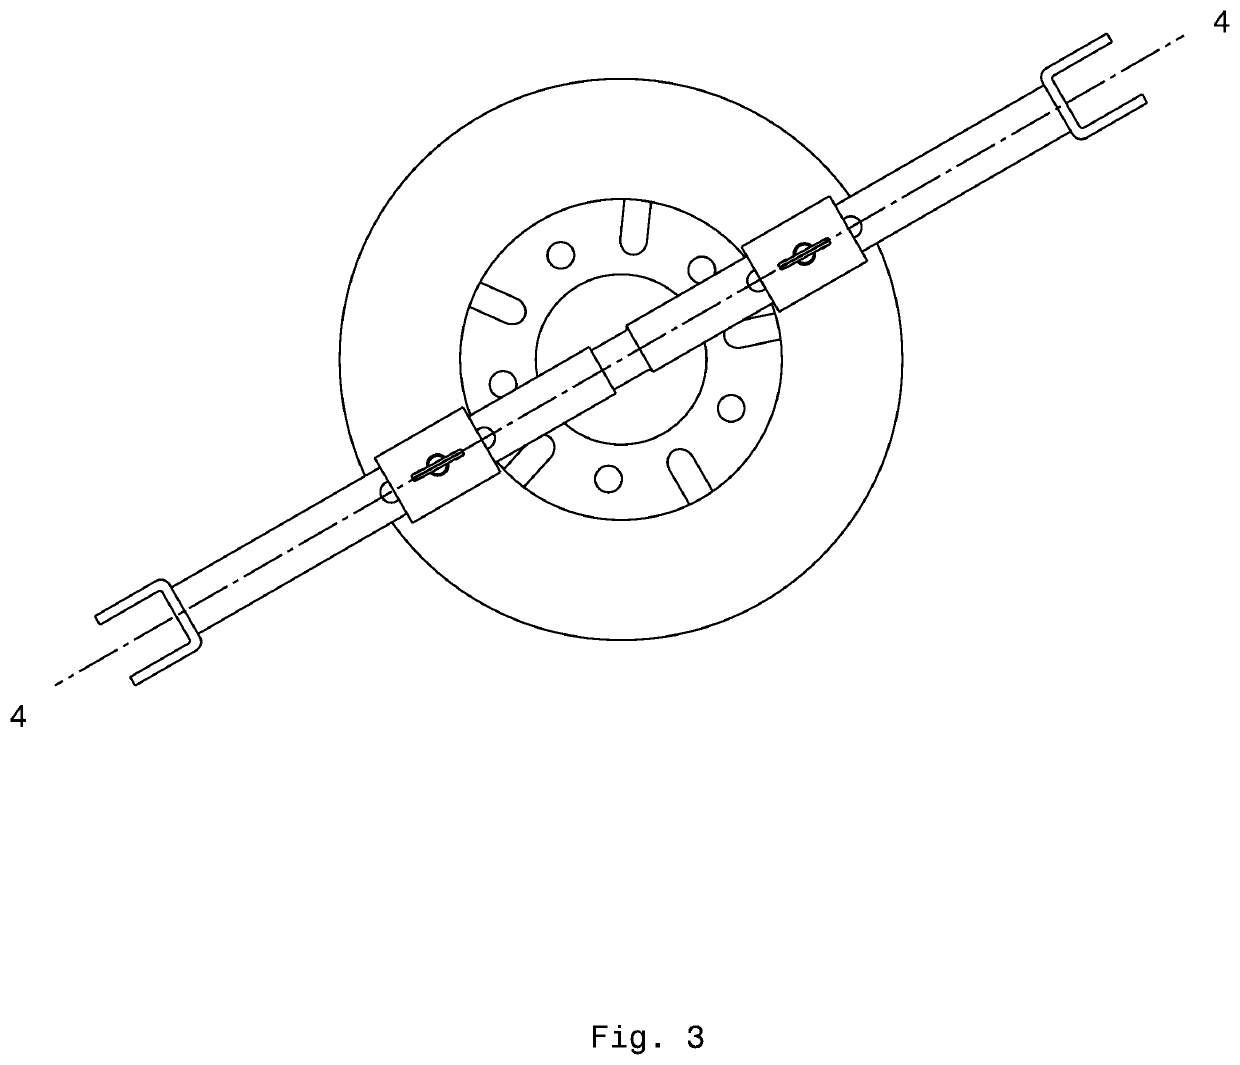 Auxiliary traction apparatus